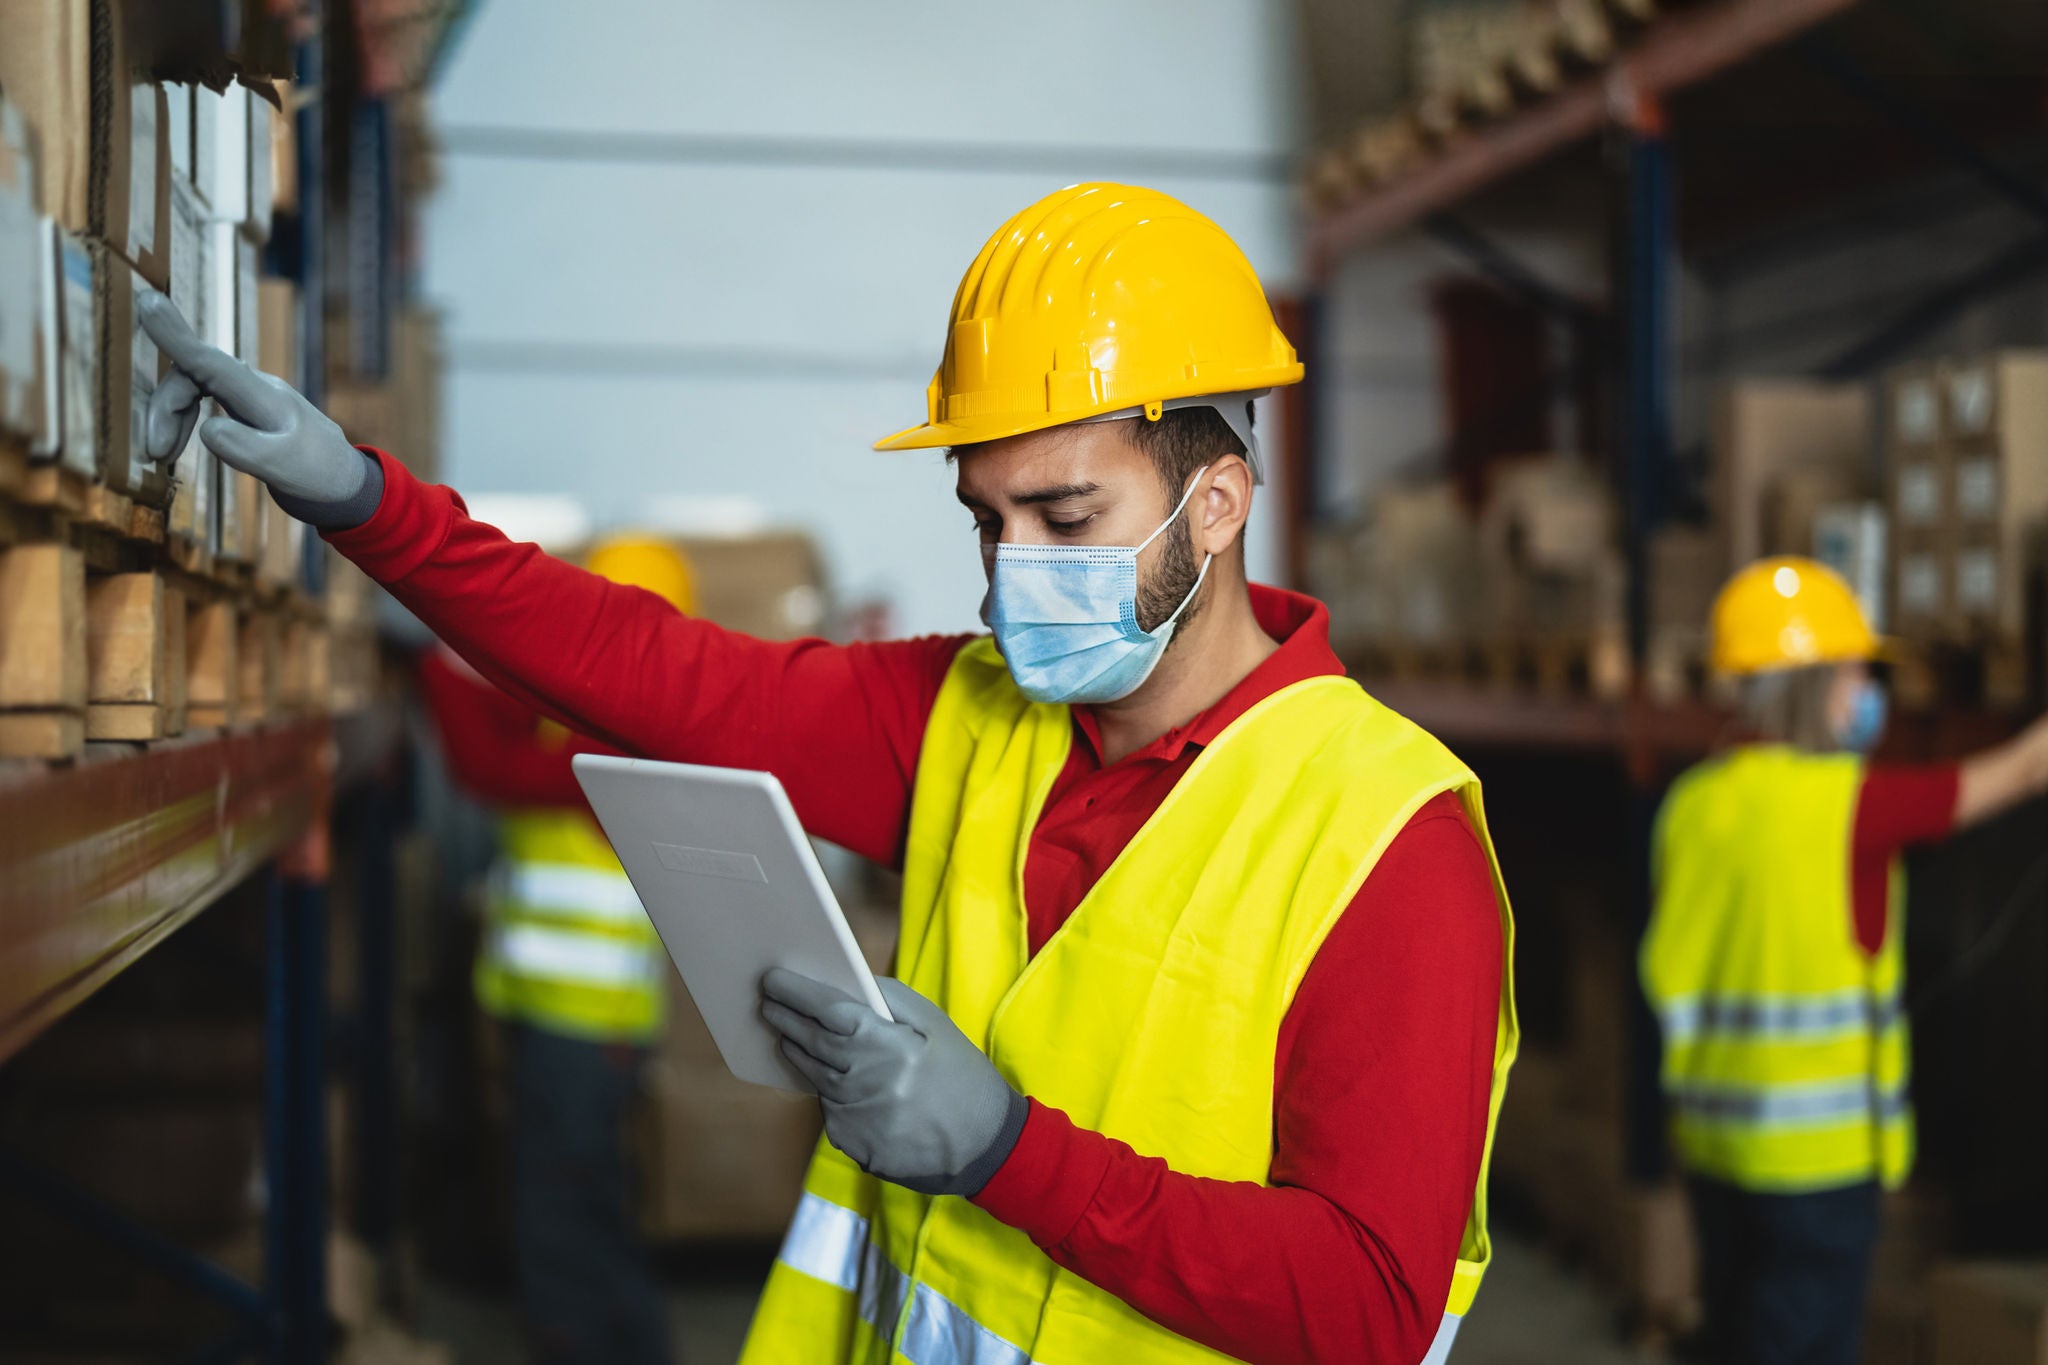 Young man working in warehouse doing inventory using digital tablet and loading delivery boxes plan while wearing face mask during corona virus pandemic - Logistic and industry concept